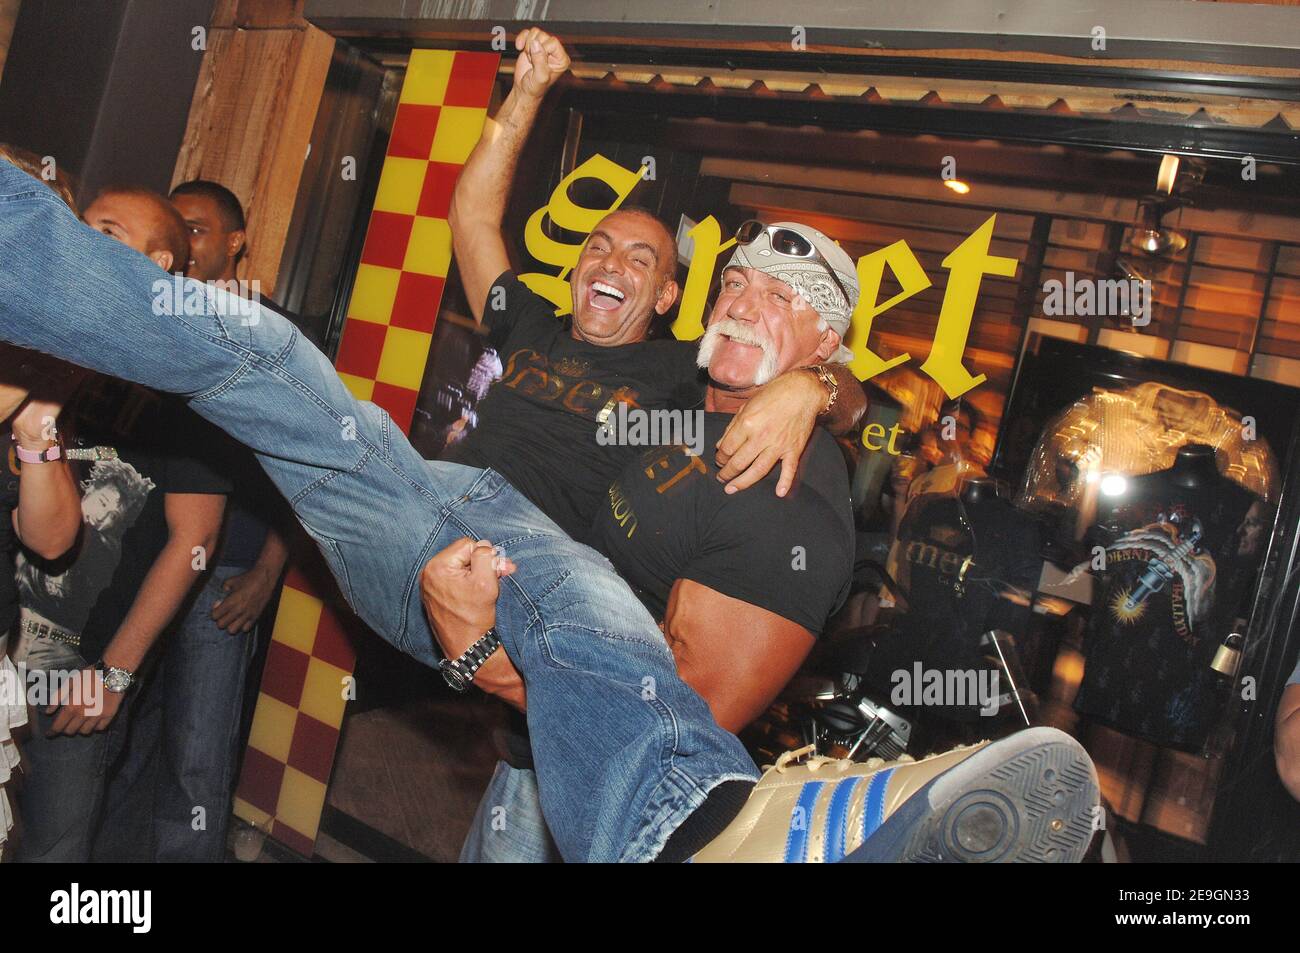 Christian Audigier presents, with Hulk Hogan, 'Smet ', his latest fashion collection honoring French rock legend Johnny Hallyday in his store of Melrose Avenue in Los Angeles, CA, USA on July 29, 2006. Photo by Lionel Hahn/ABACAPRESS.COM Stock Photo